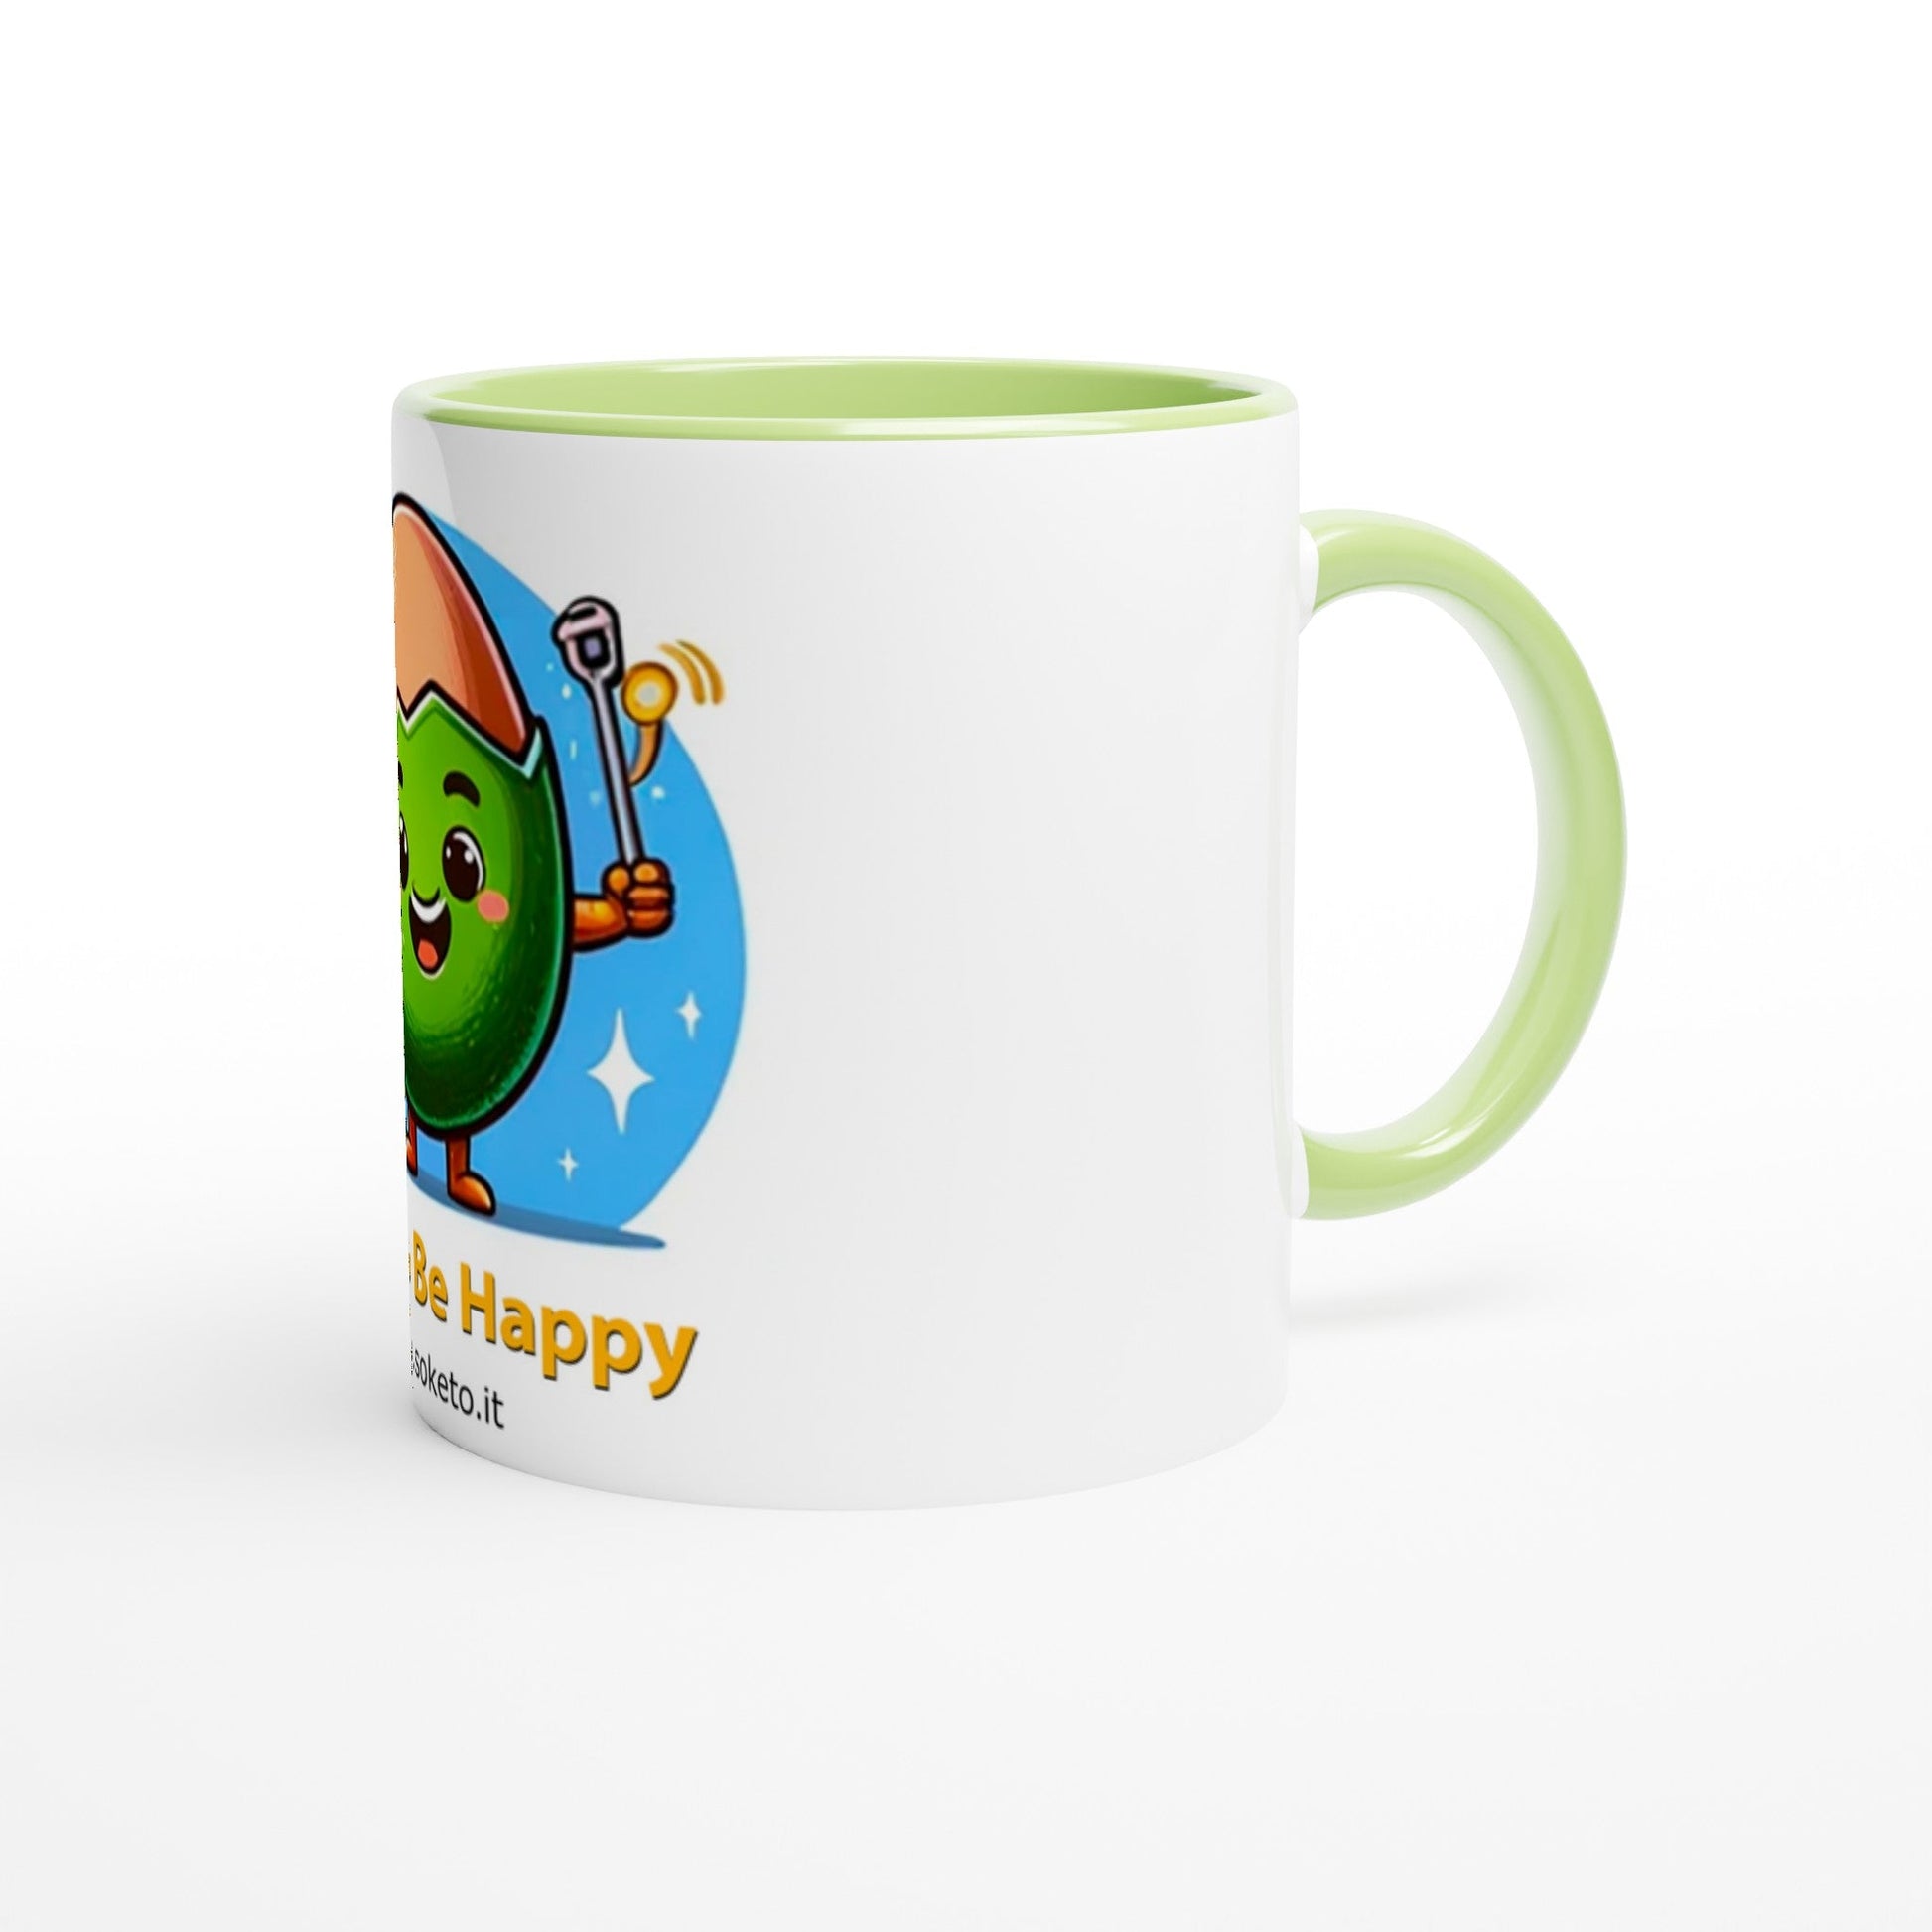 350ml "Be Keto Be Happy" Mug with Colored Interior - Start the Day with Style and Health-6